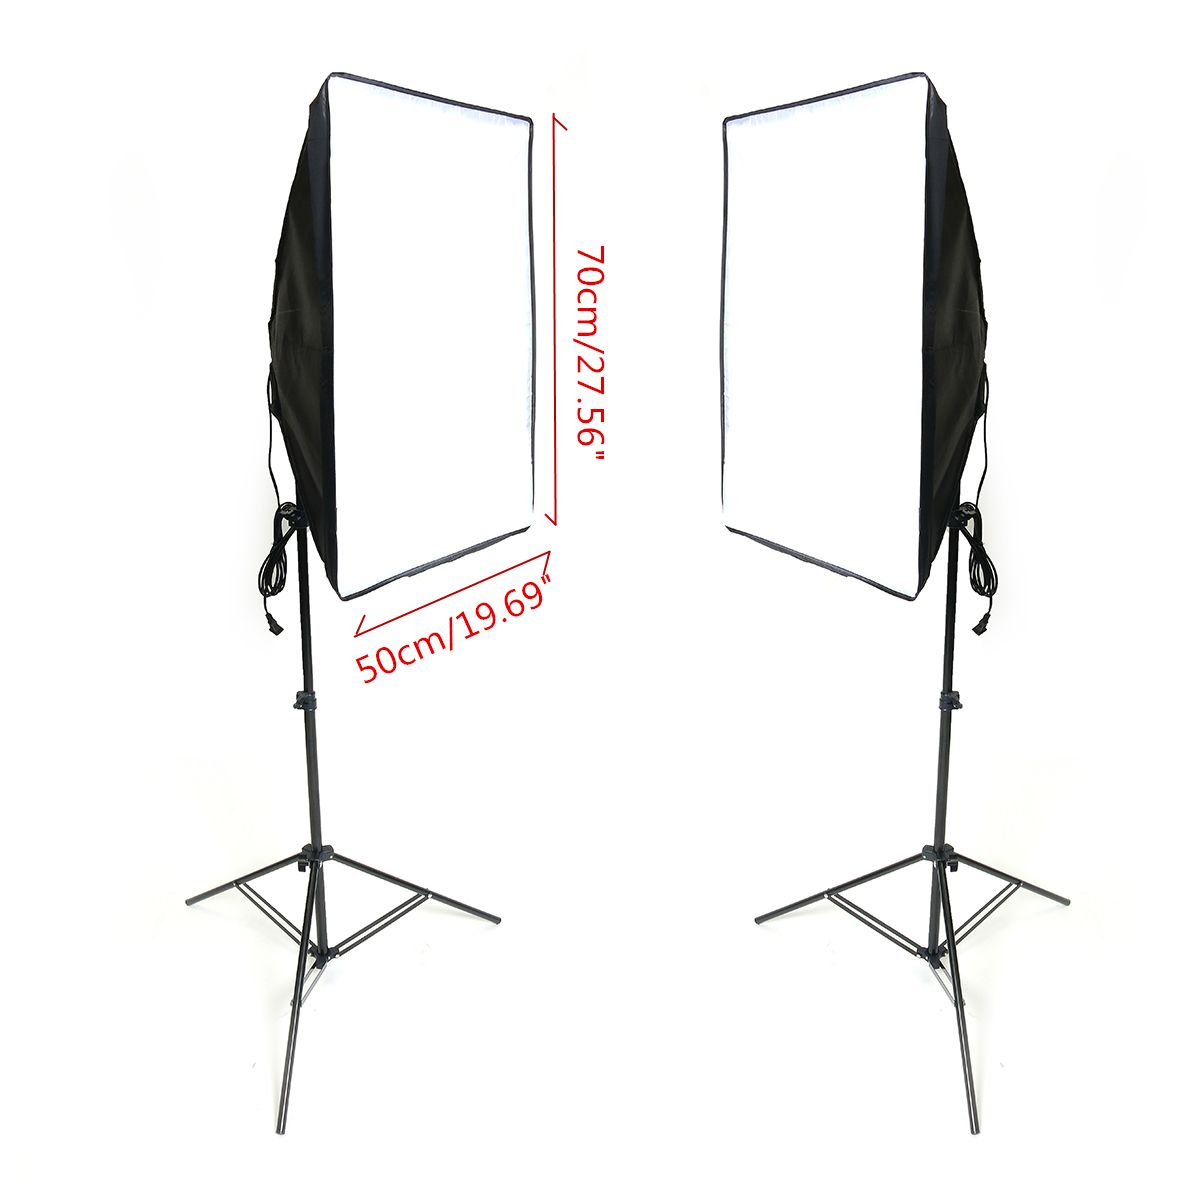 2x-Studio-Photography-Video-Softbox-Light-Stand-Continuous-Lighting-Kit-50x70cm-1691975